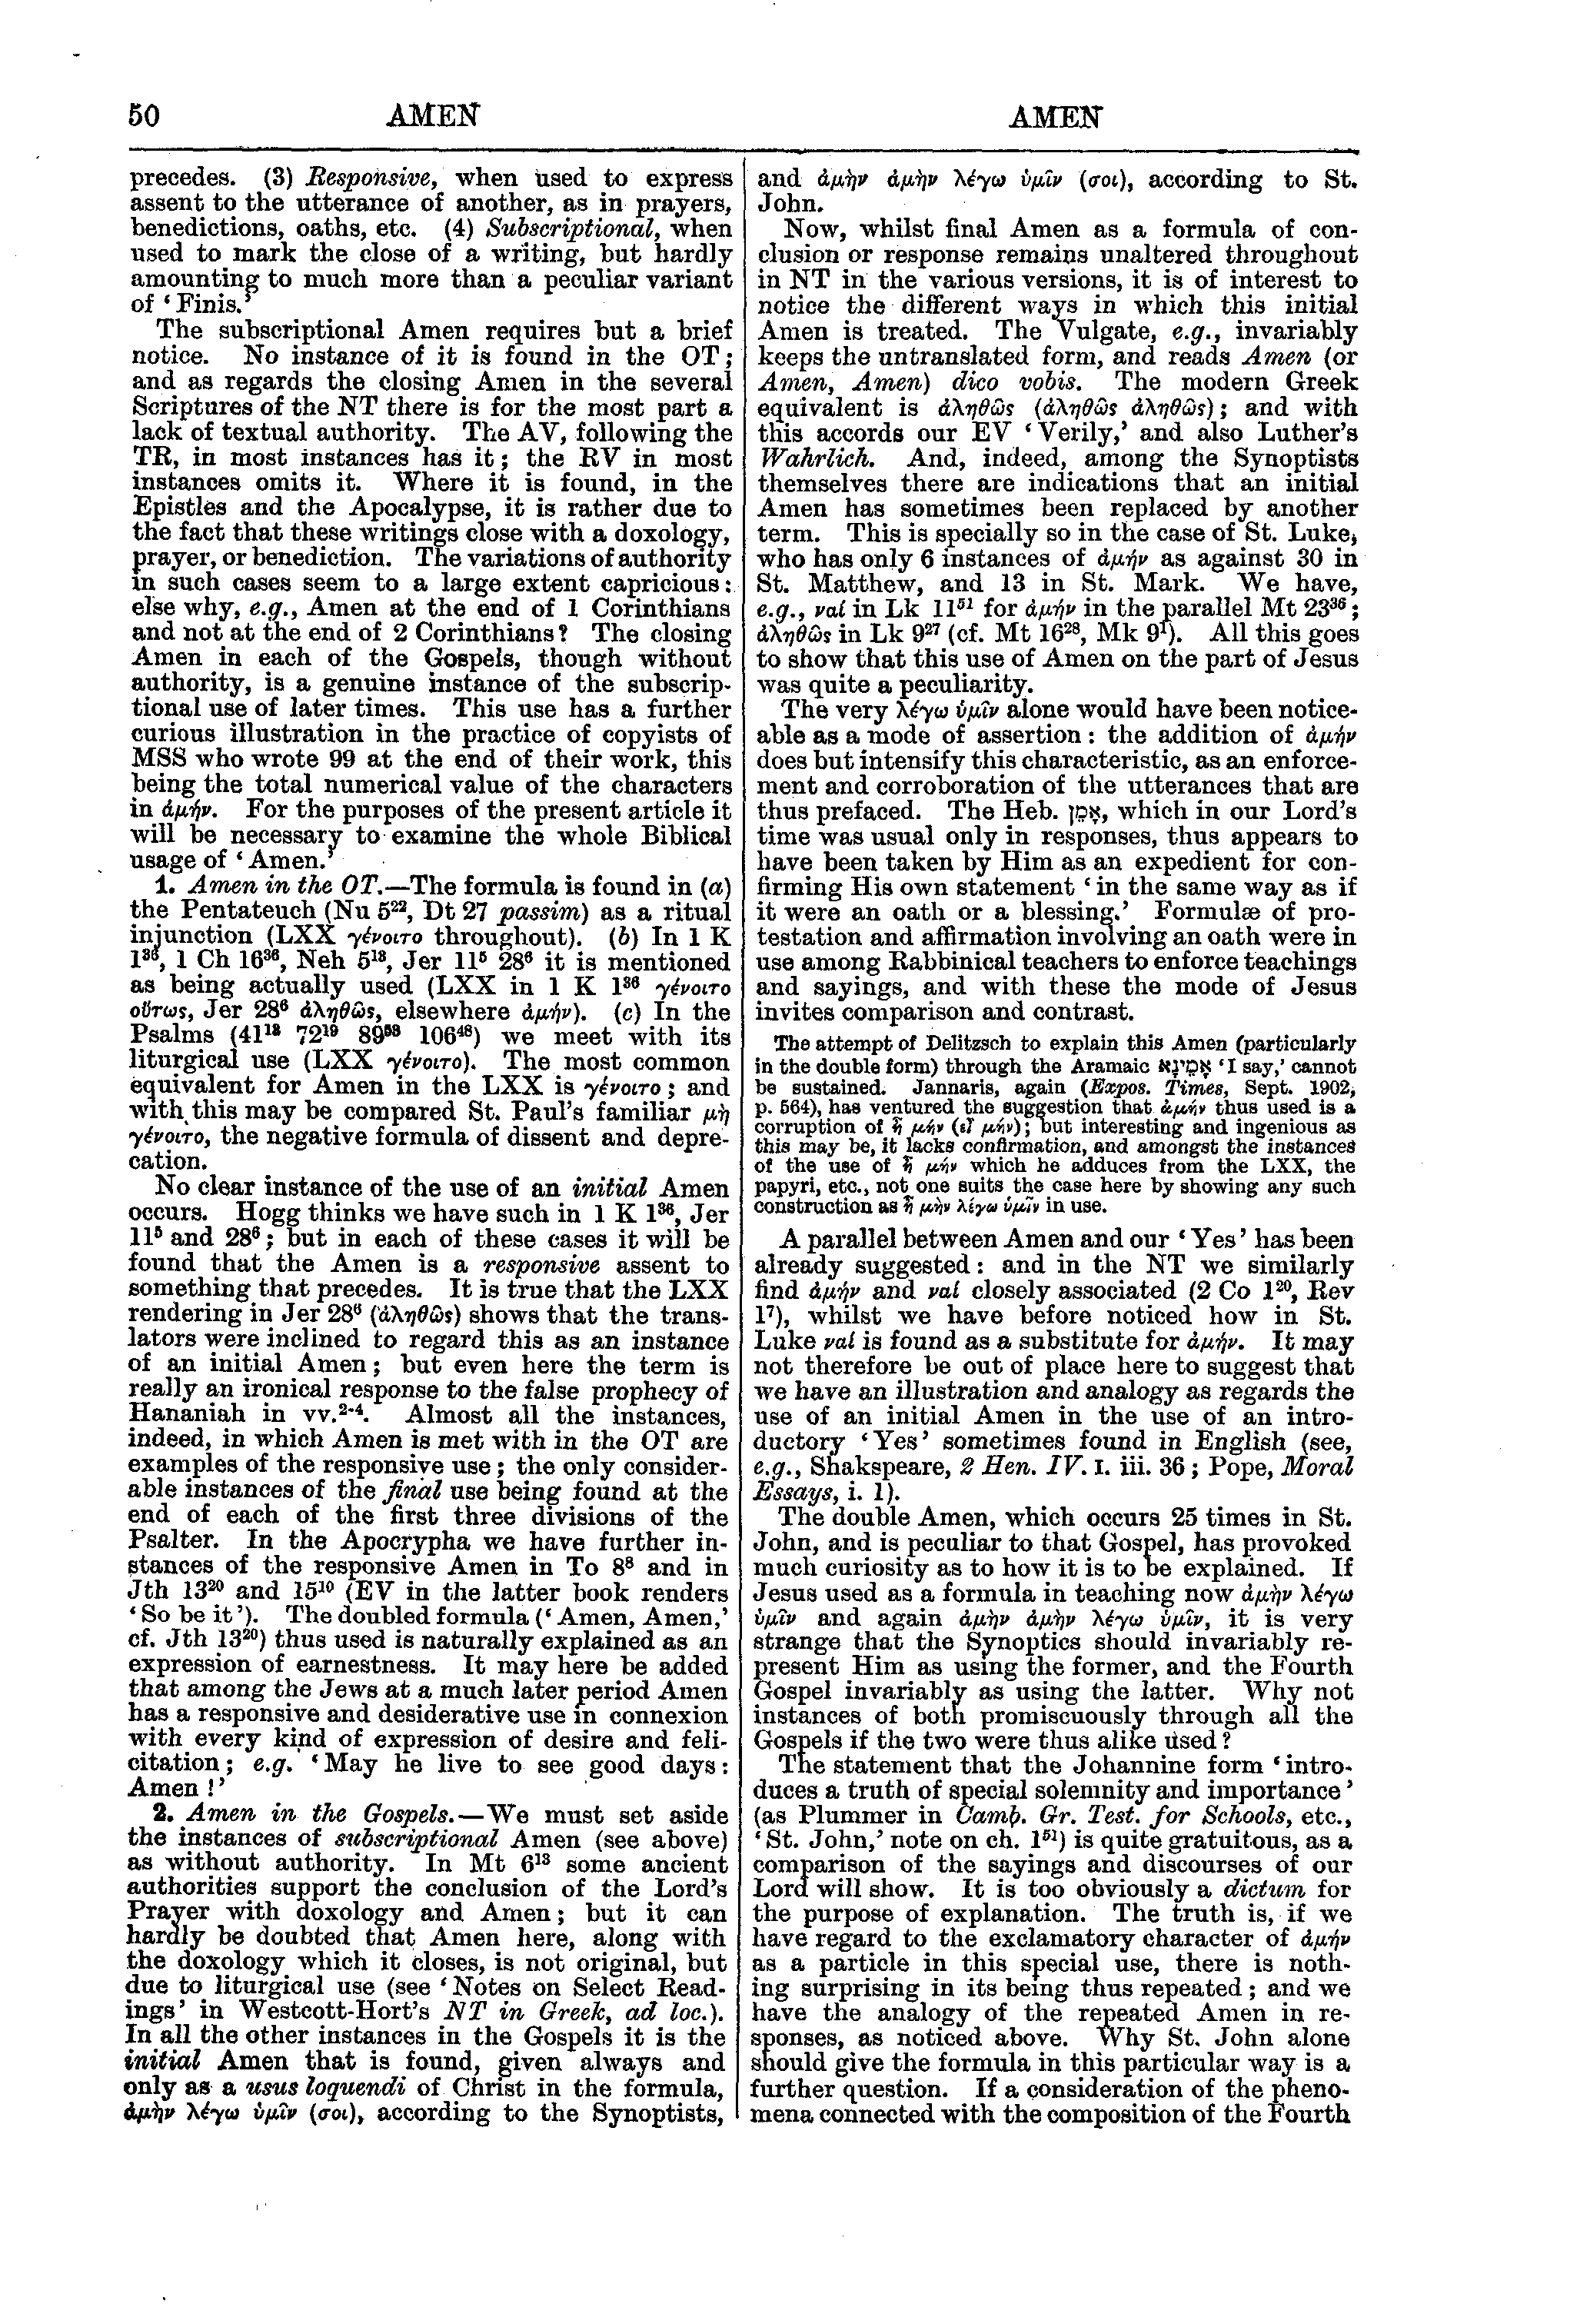 Image of page 50